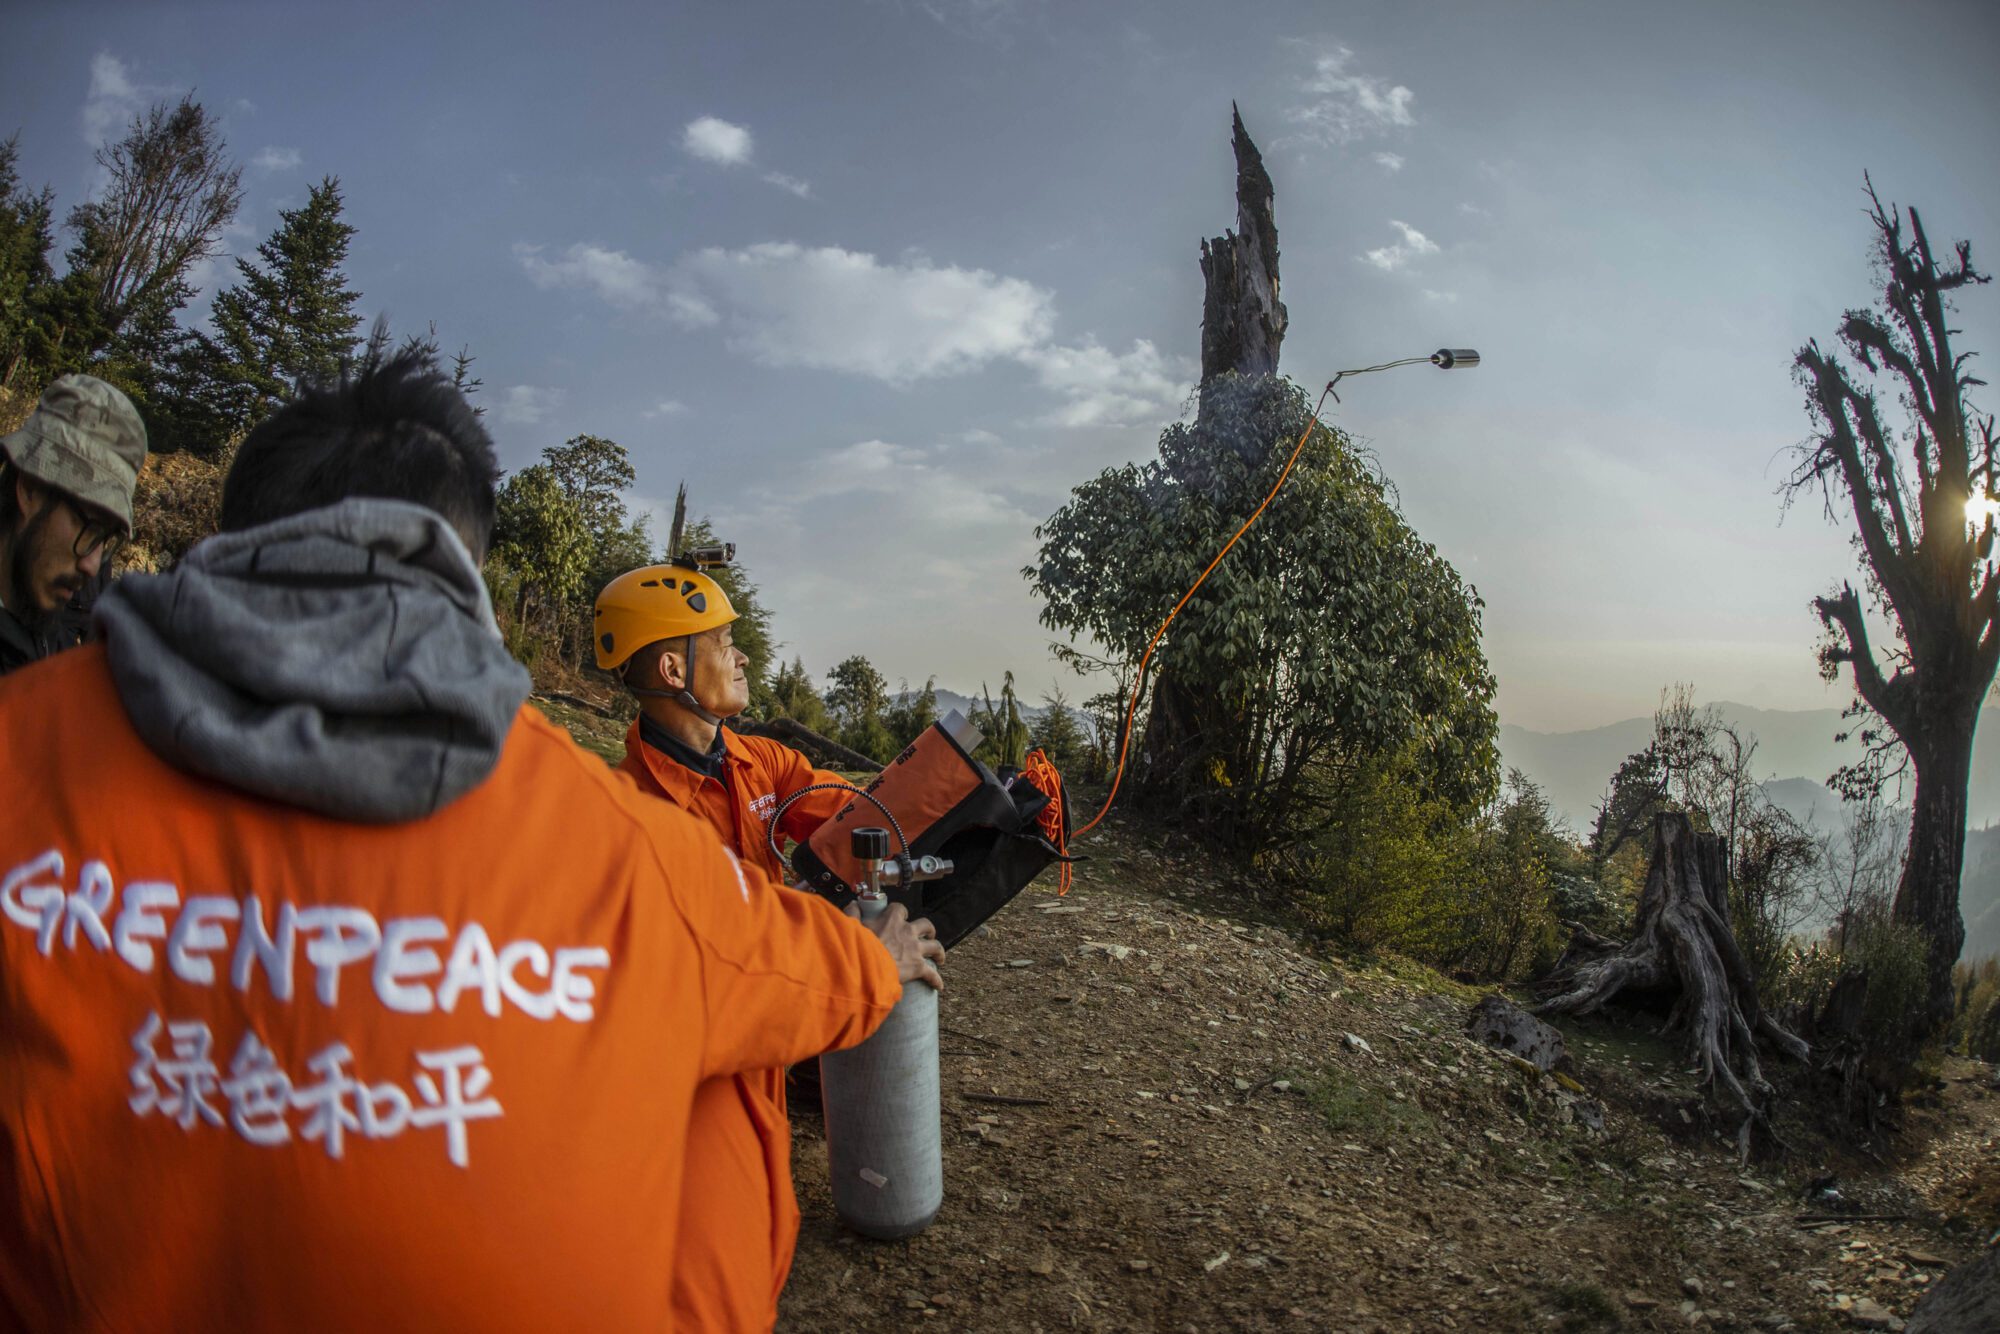 Two people in bright orange Greenpeace jackets, one with their back to us showing the Greepeace logo and Chinese characters. The other is throwing a rope towards a tree